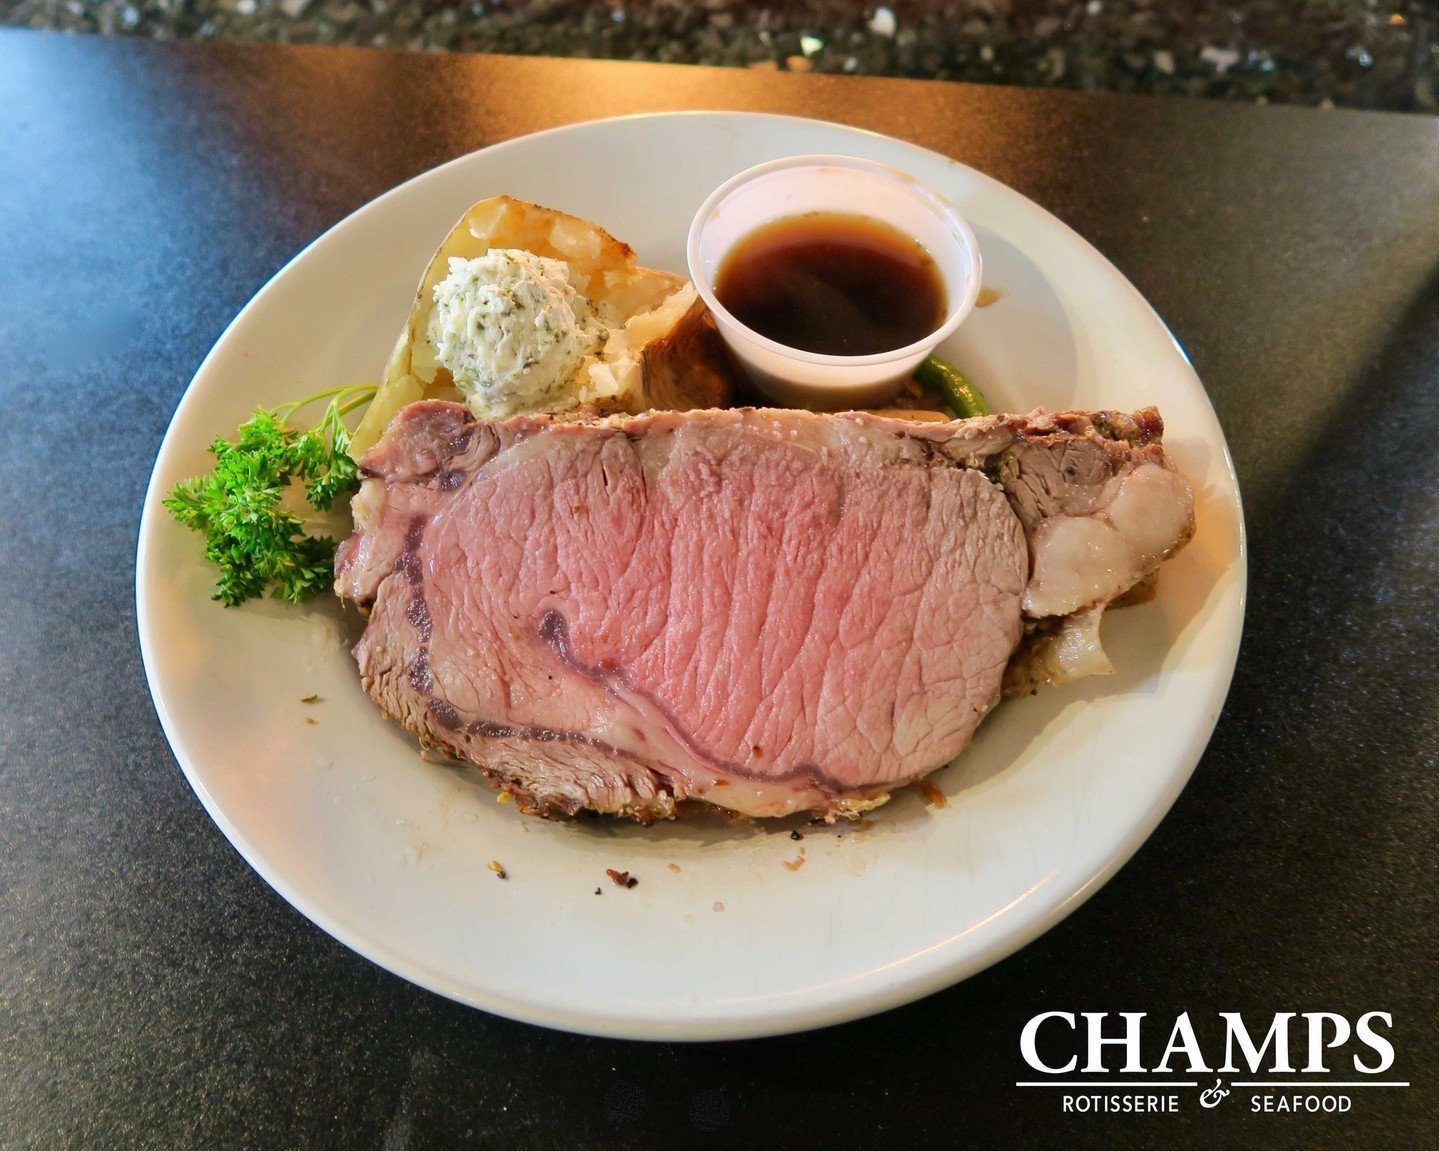 Saturday Special: Prime Rib &amp; Au Jus Dinner&mdash;get it before it's gone!